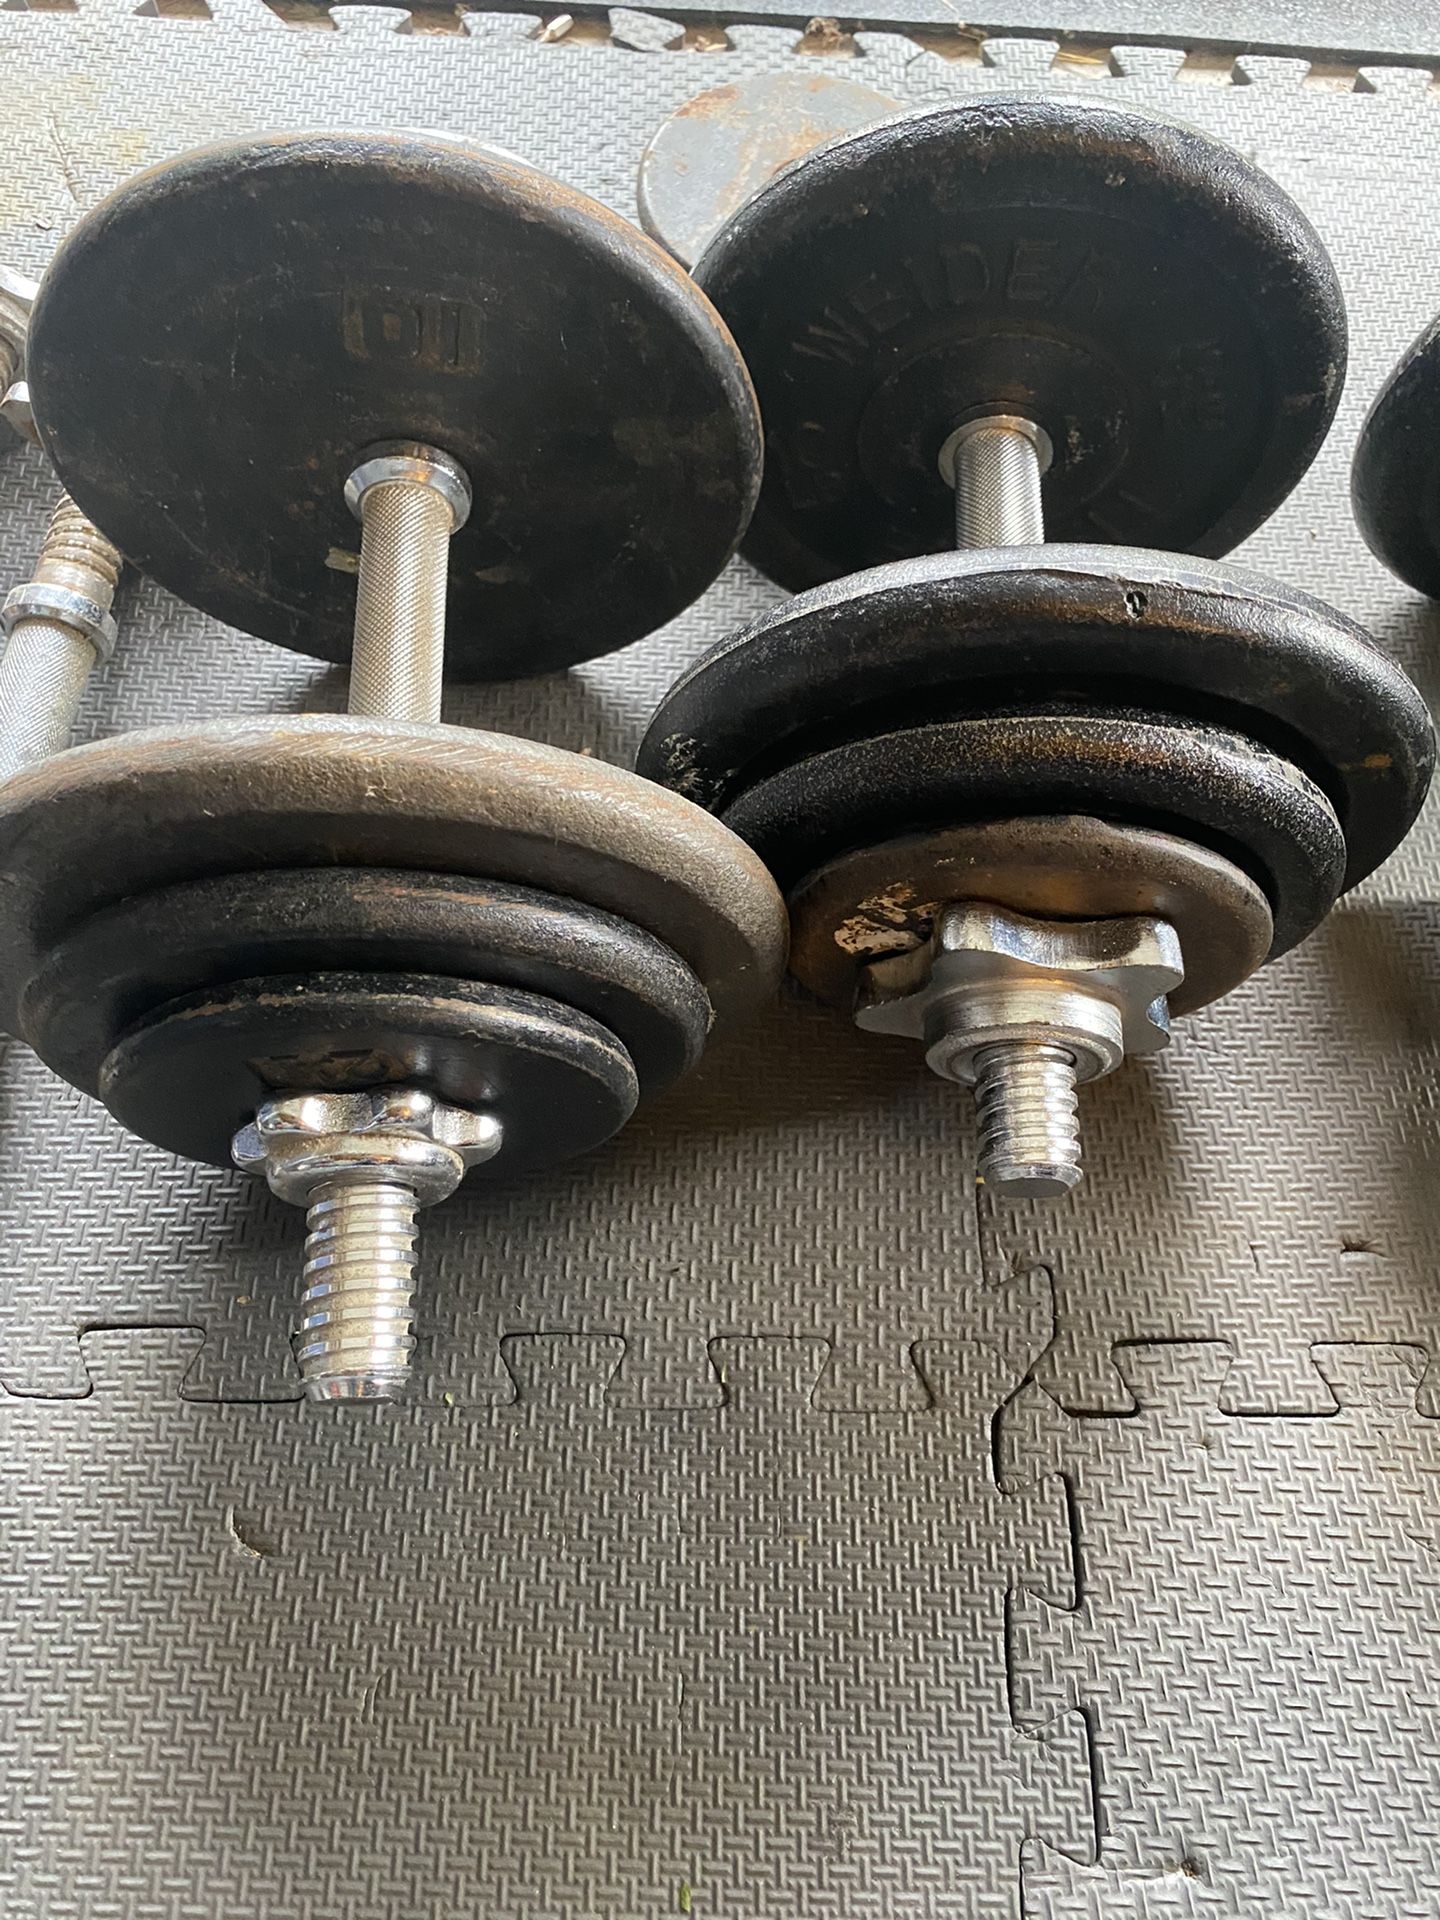 2 - 40 lb adjustable dumbbell weights - 80 lbs total